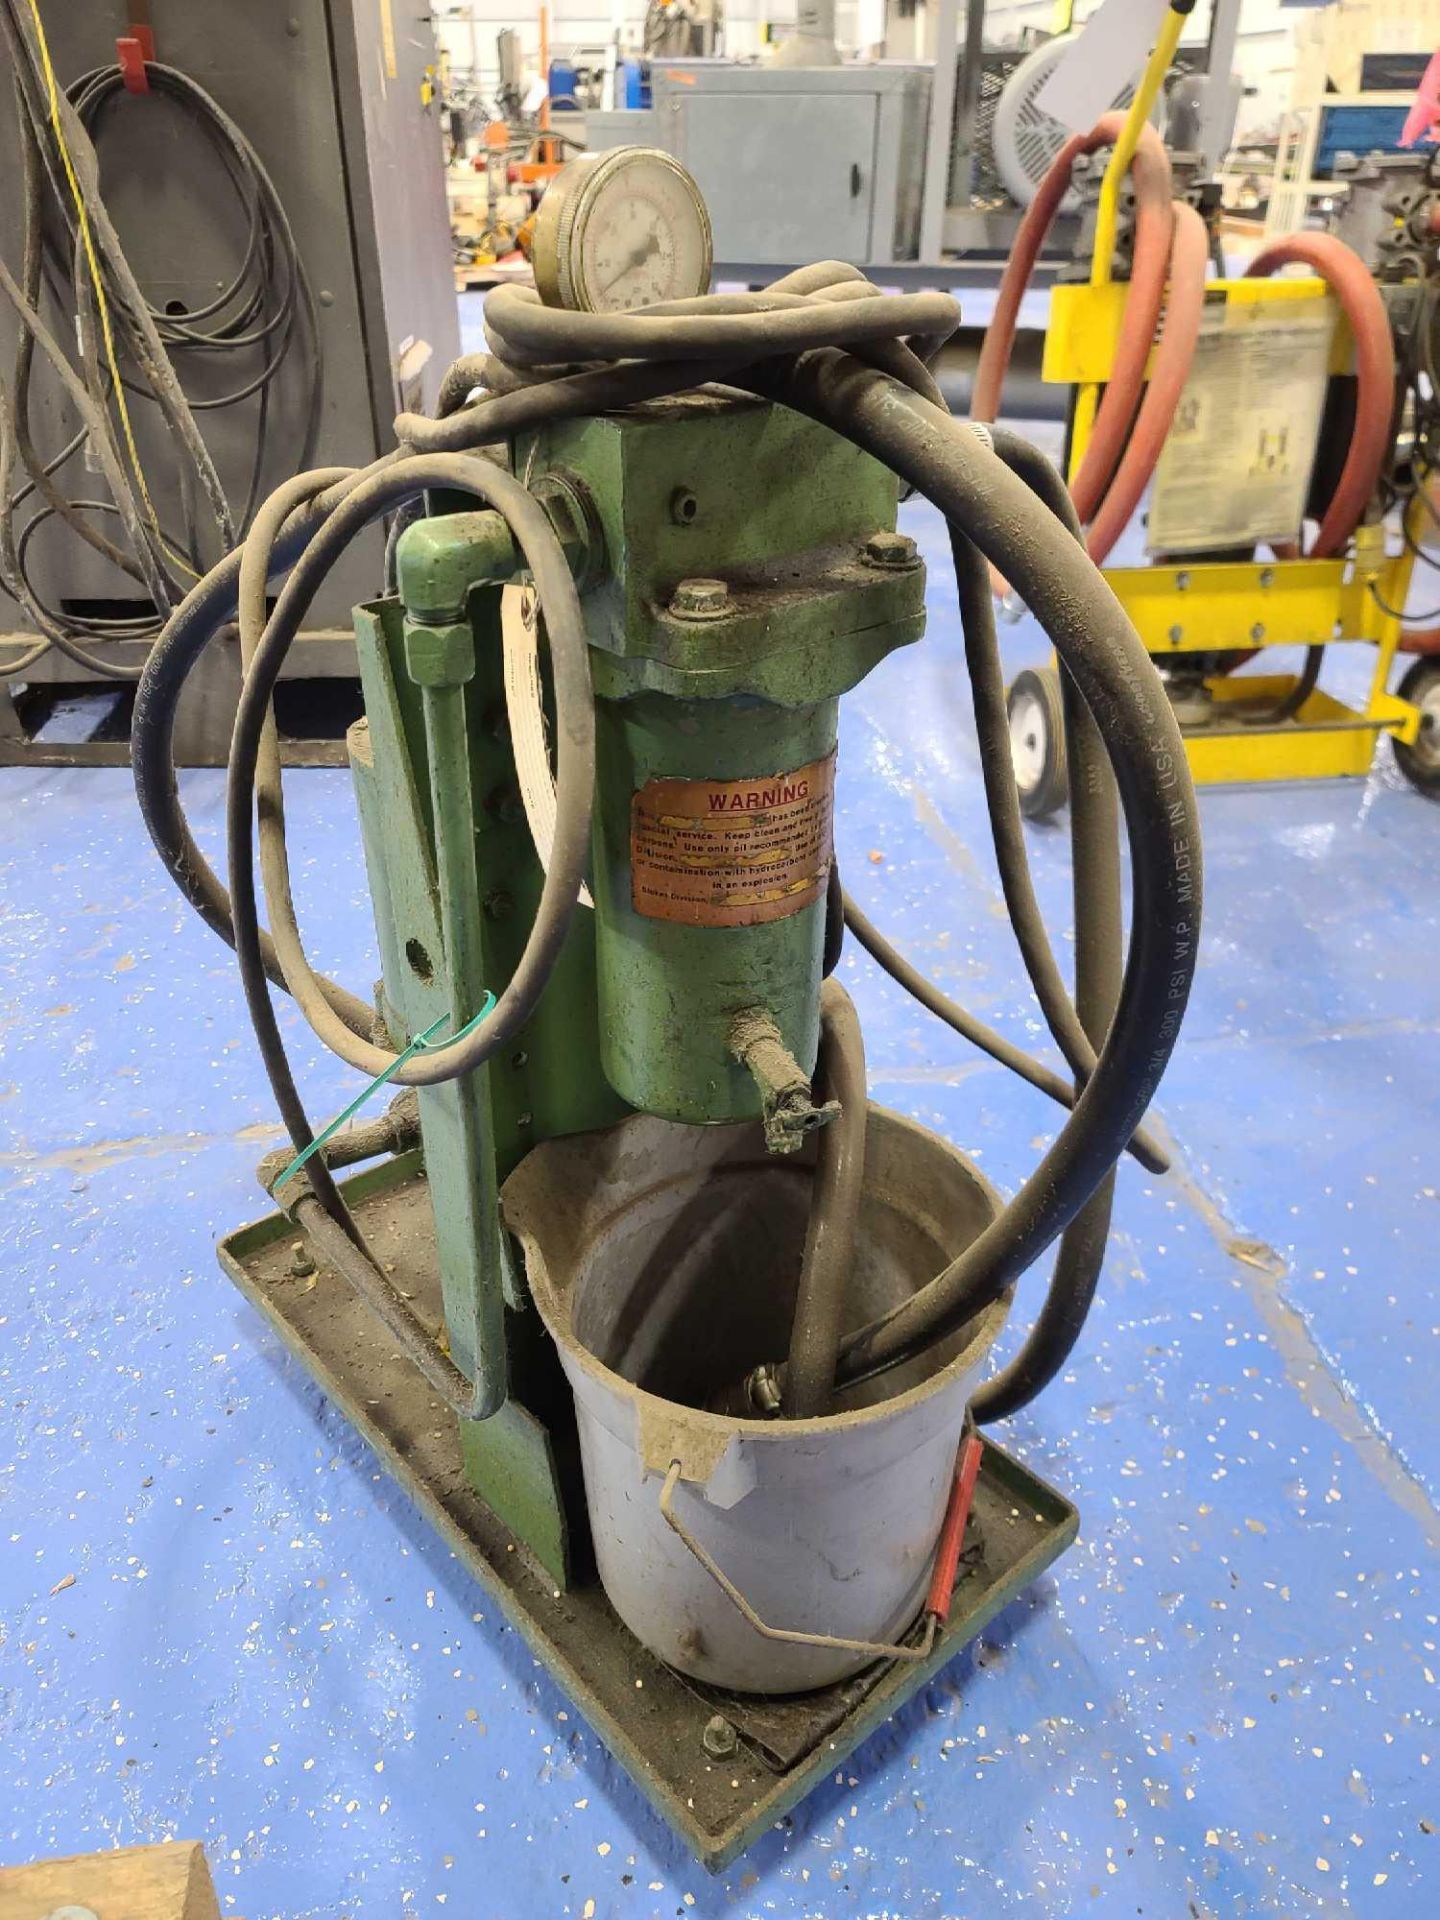 Stokes Vacuum Equipment 339-151 Pump with Filter - Image 2 of 2